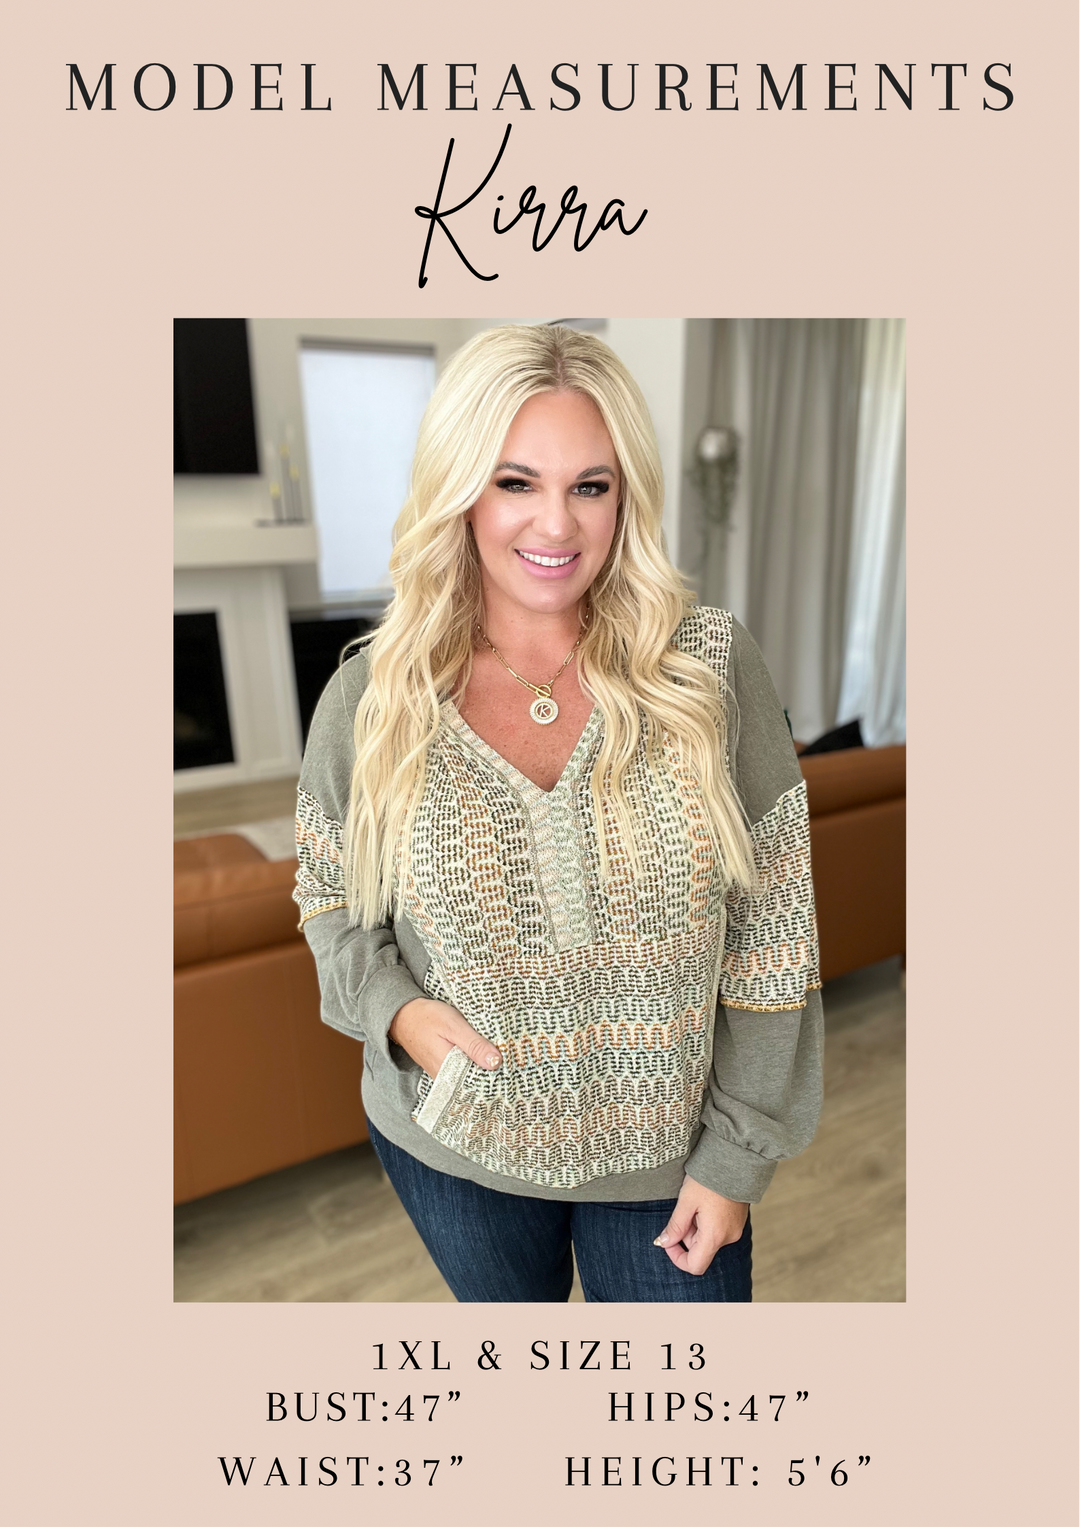 Buttery Soft V-Neck Long Sleeve Loungewear Set in Teal-2 Piece Outfit Sets-Krush Kandy, Women's Online Fashion Boutique Located in Phoenix, Arizona (Scottsdale Area)